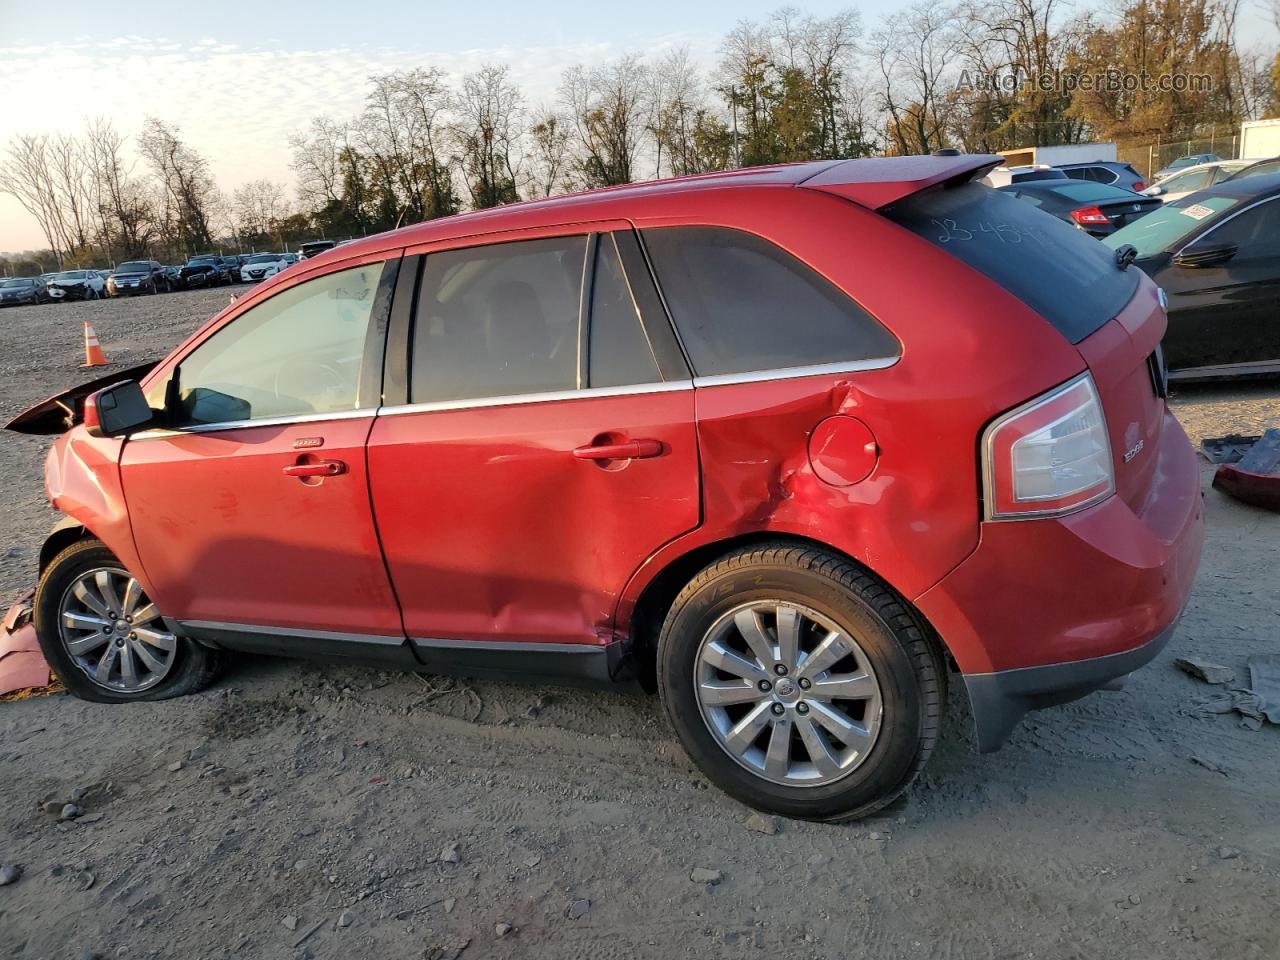 2010 Ford Edge Limited Red vin: 2FMDK3KC9ABB63049